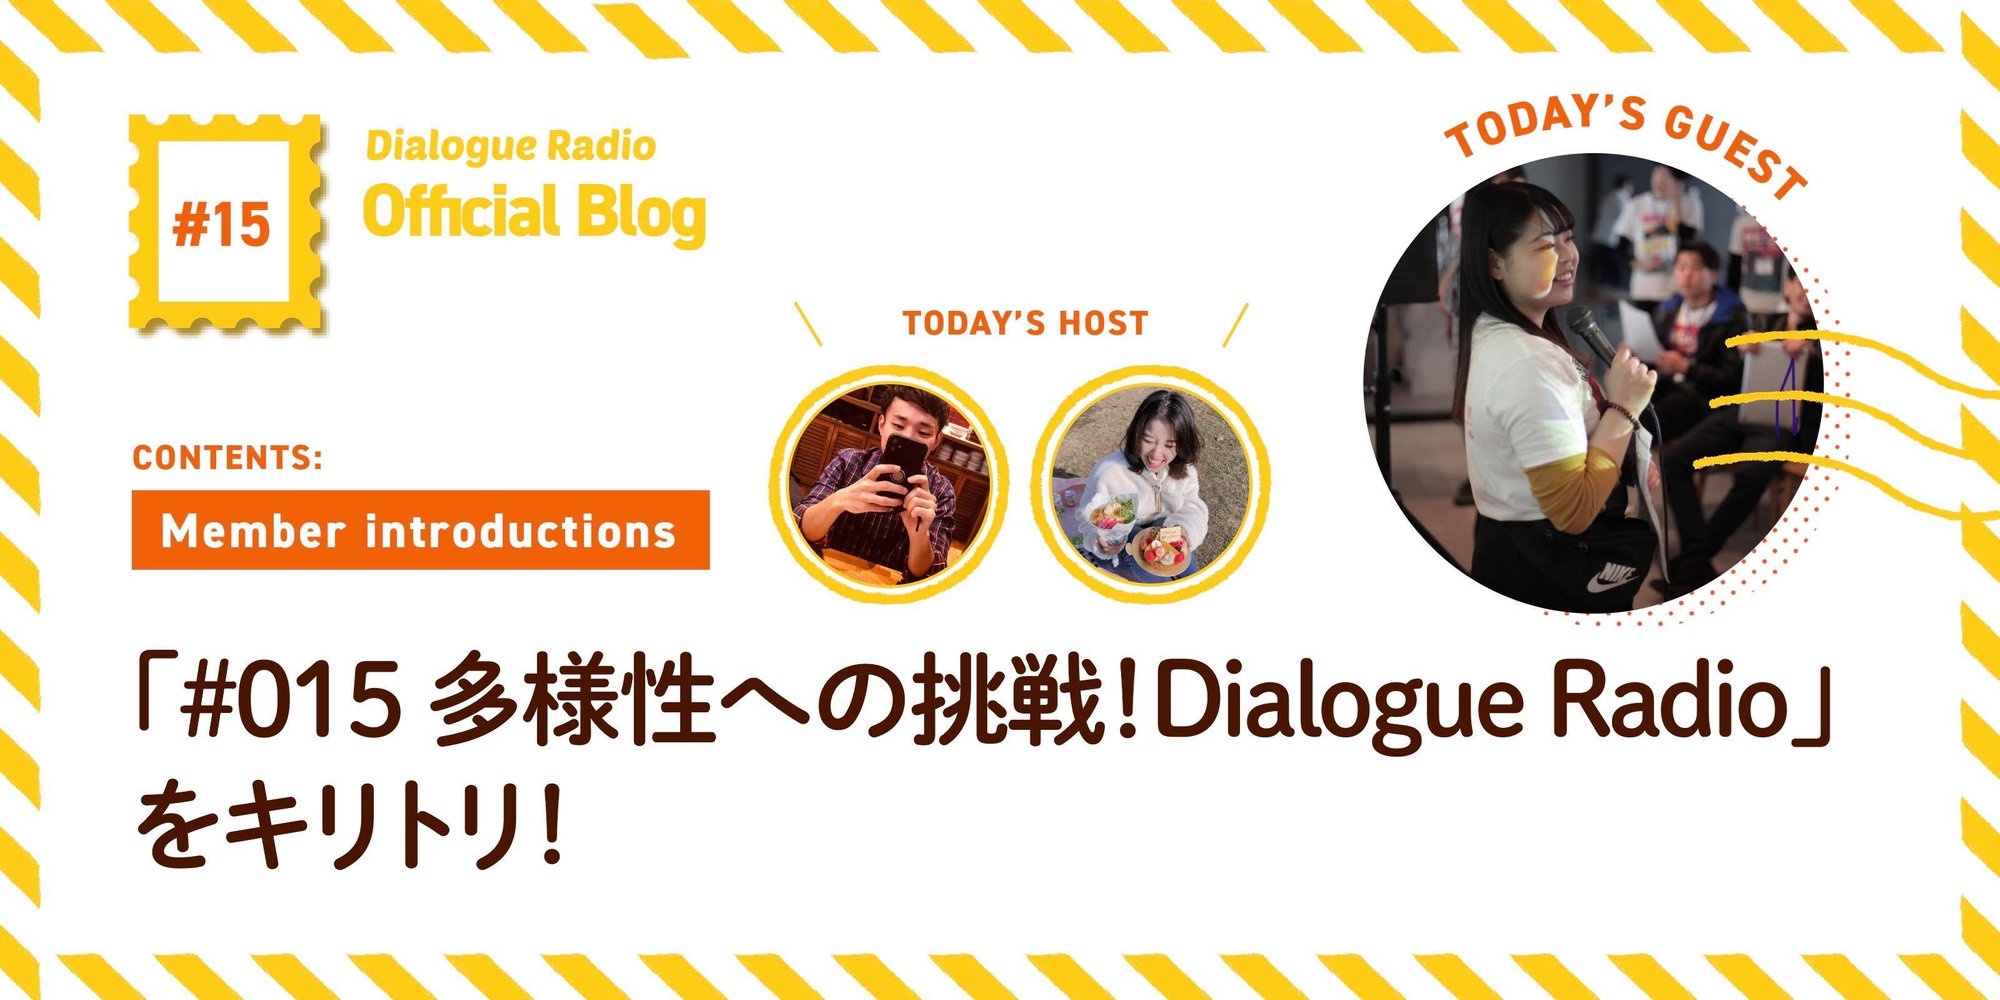 Cover Image for 「#015 多様性への挑戦！Dialogue Radio」をキリトリ！